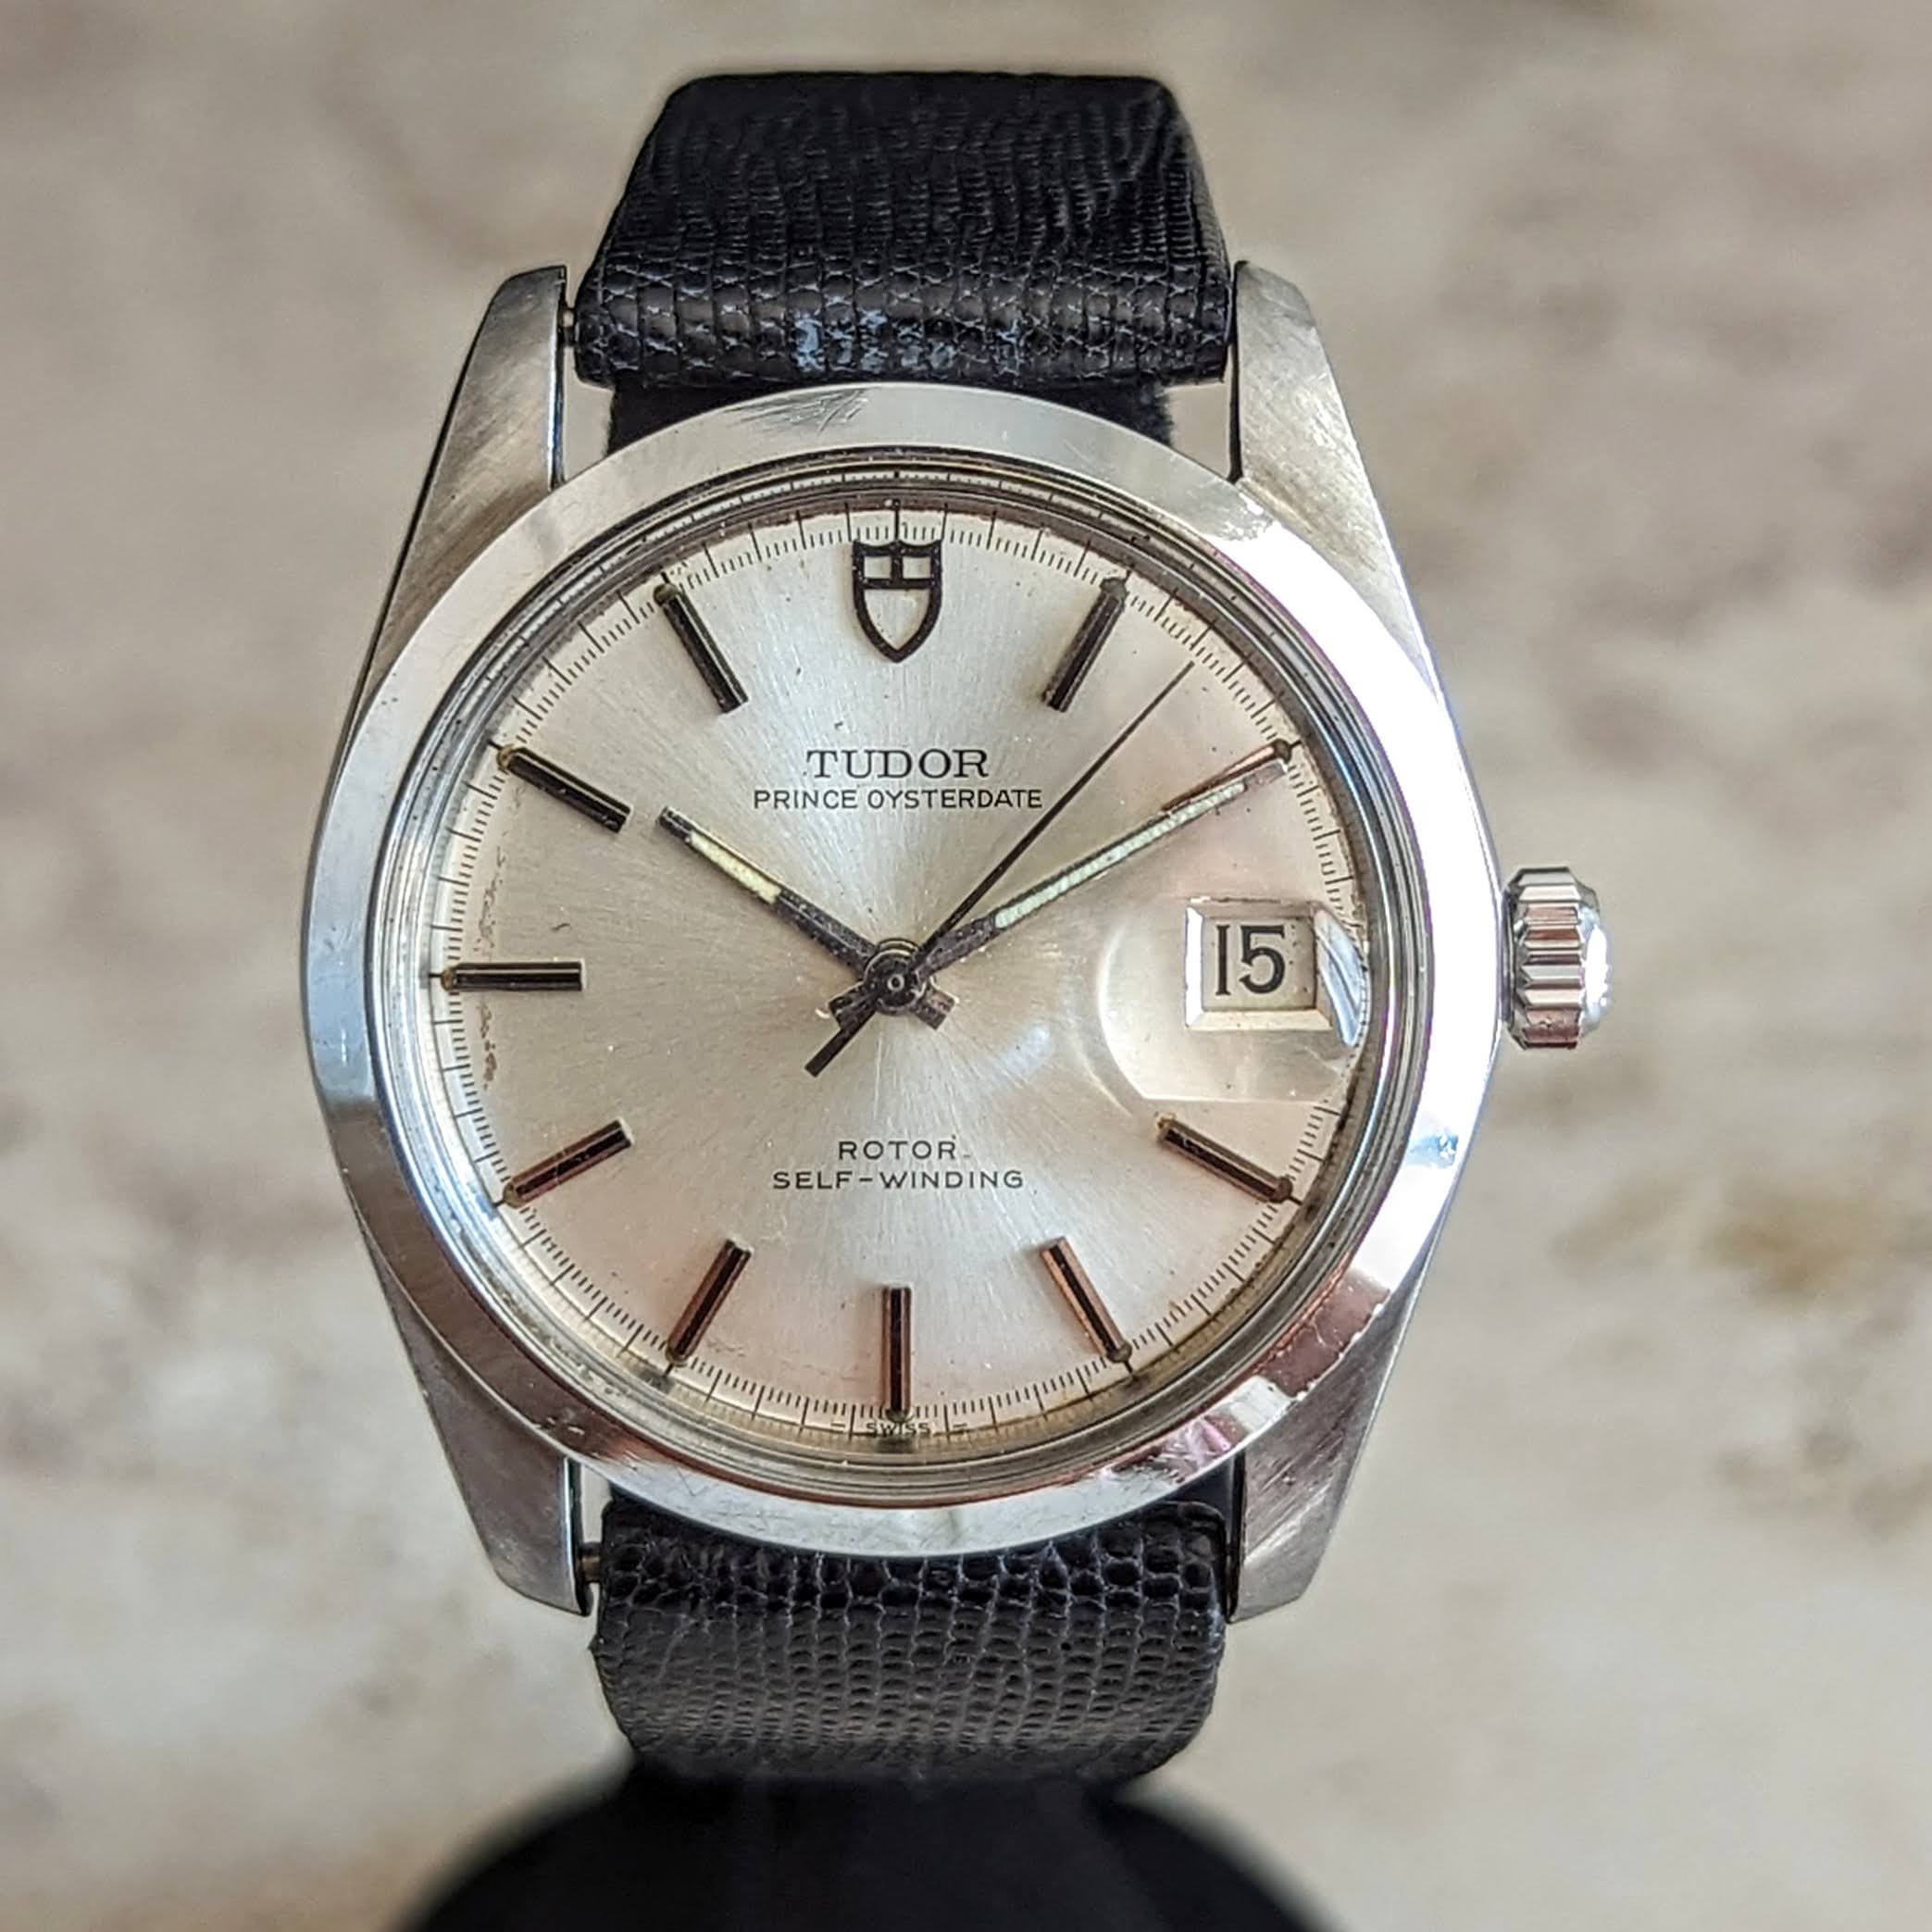 1969 TUDOR Prince Oysterdate Rotor Self-Winding Watch Ref. 9050/0 Vintage Automatic Wristwatch